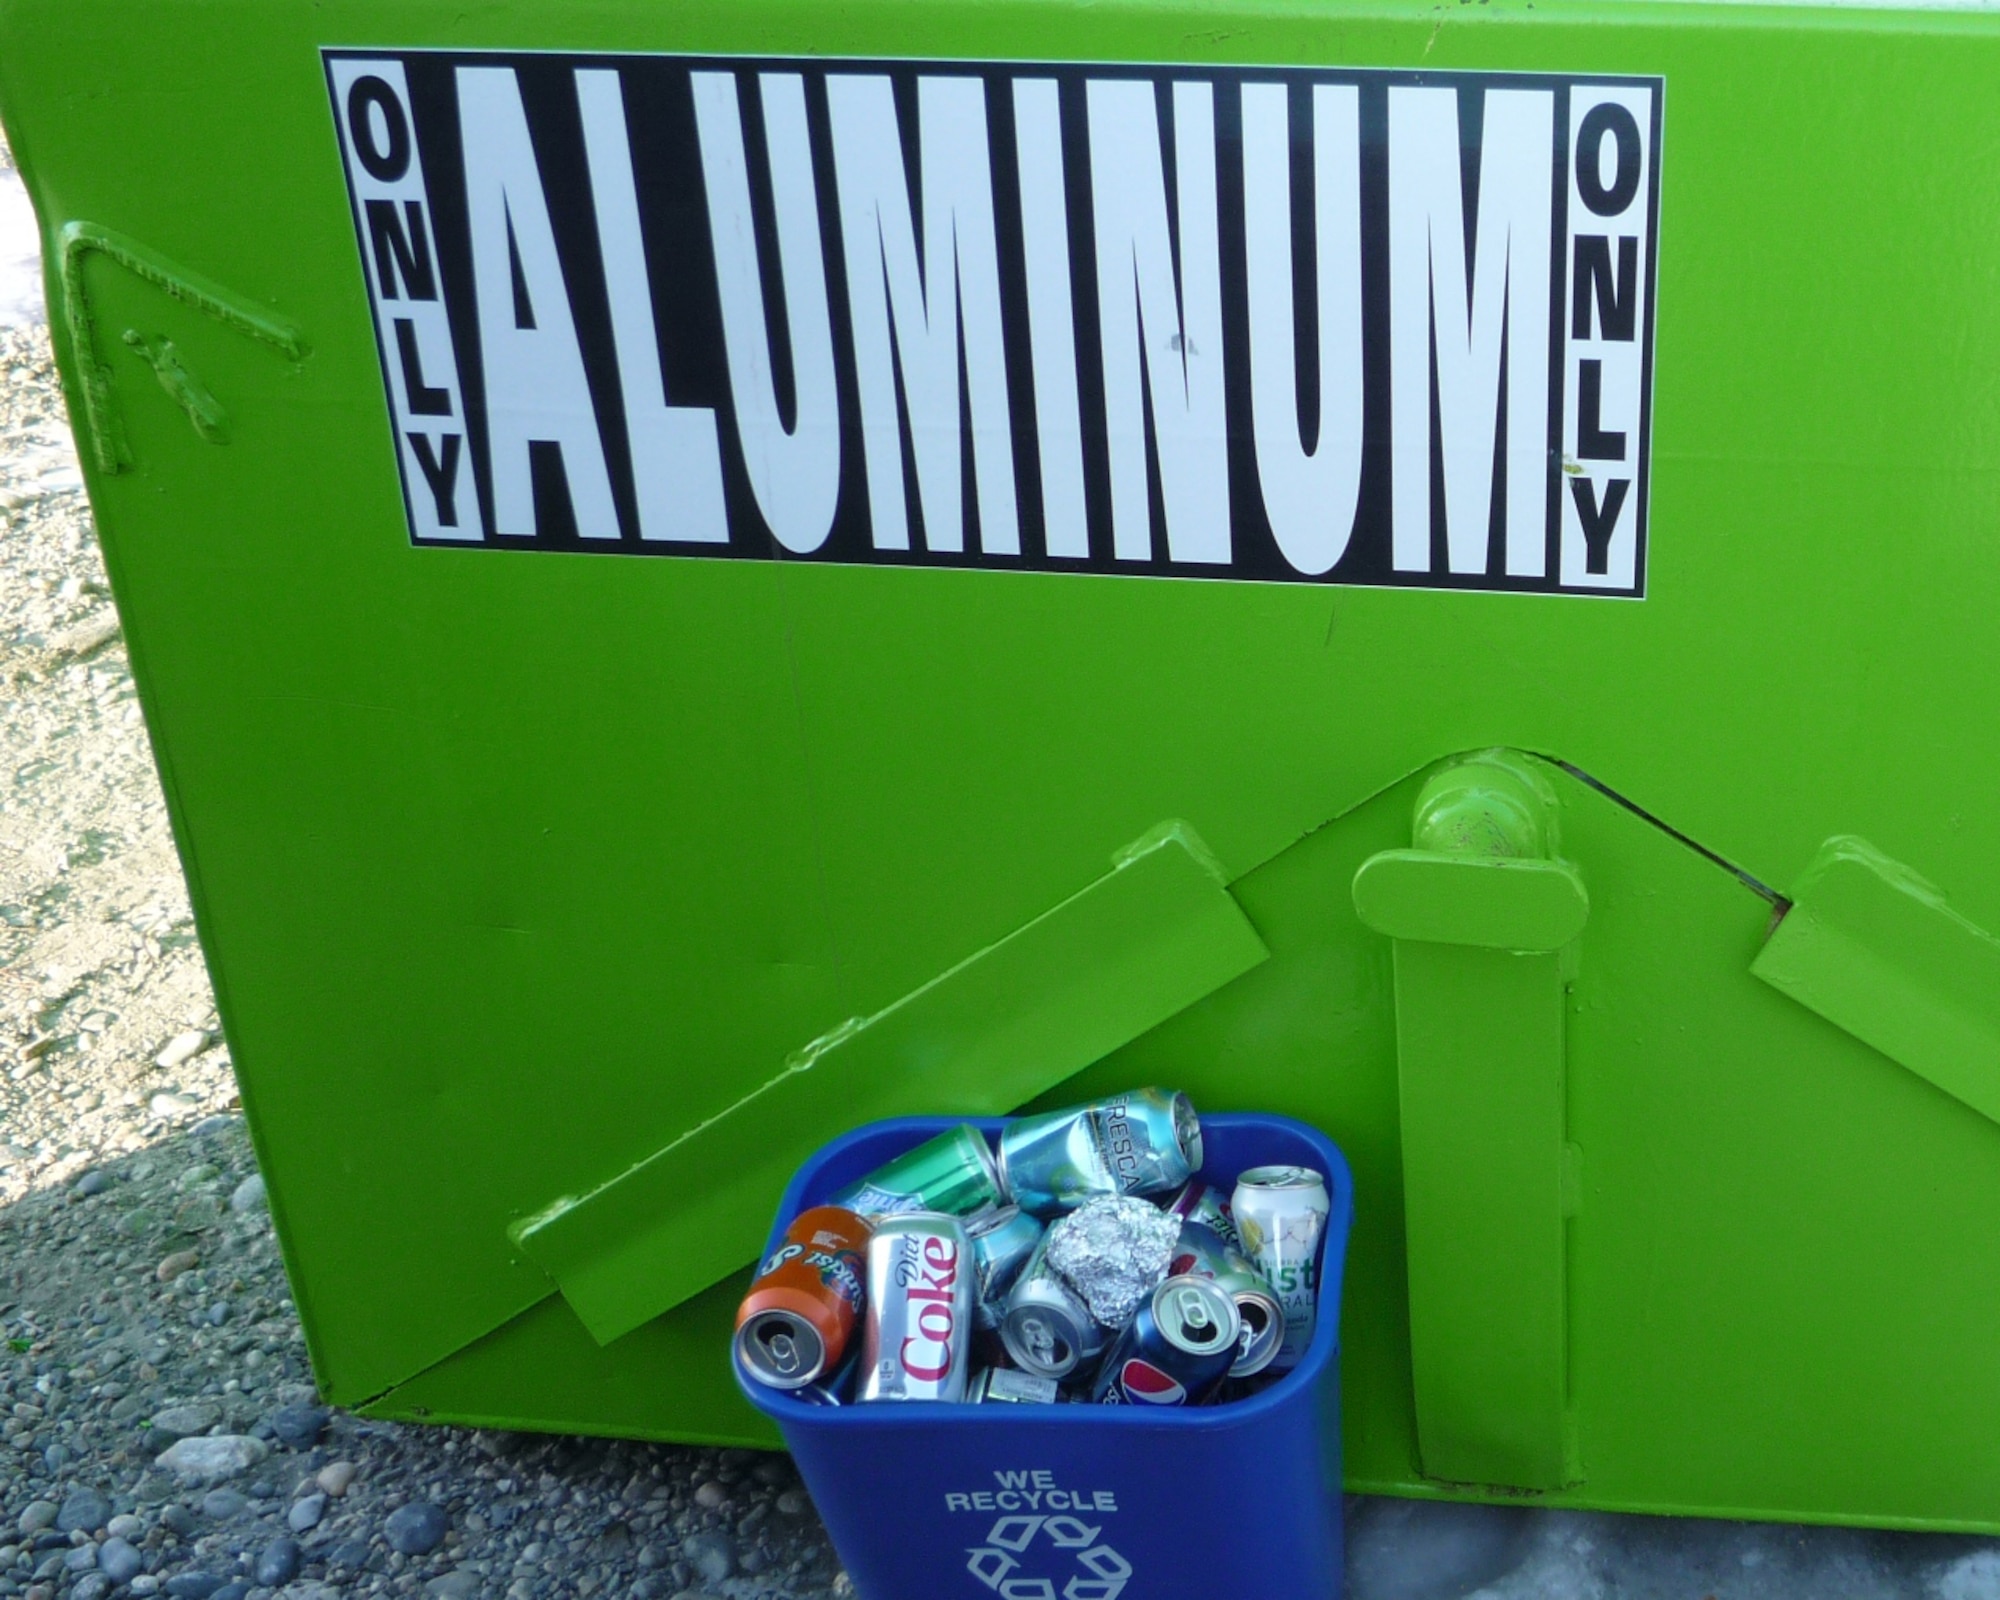 Aluminum cans go in the green collection dumpsters. Leave the cans uncrushed as they are easier to process and take them out of bags or boxes.  Only empty aluminum cans and clean regular aluminum foil are acceptable for this bin.  Other heavier aluminum items need to go into scrap metal bins.  (Courtesy photo)